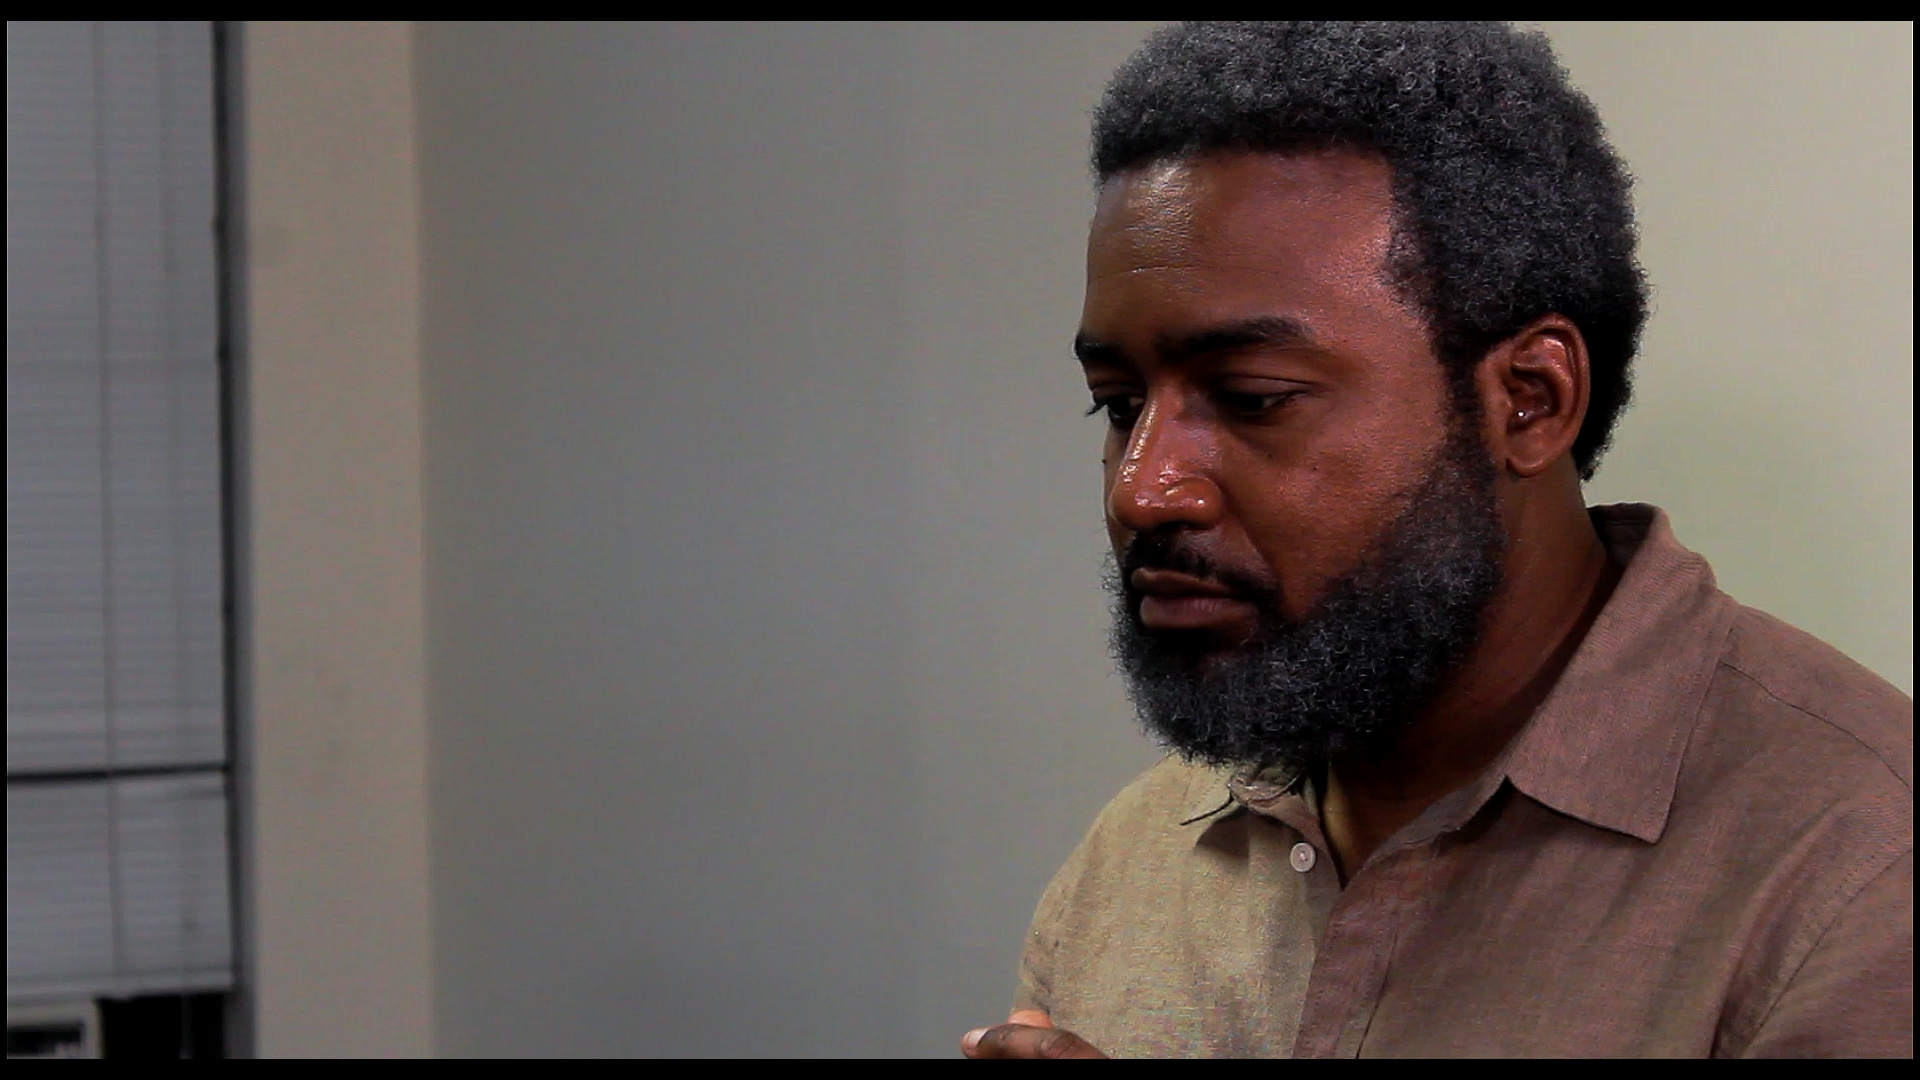 Lionel Russell (Khalif Cotton) remembers his past.